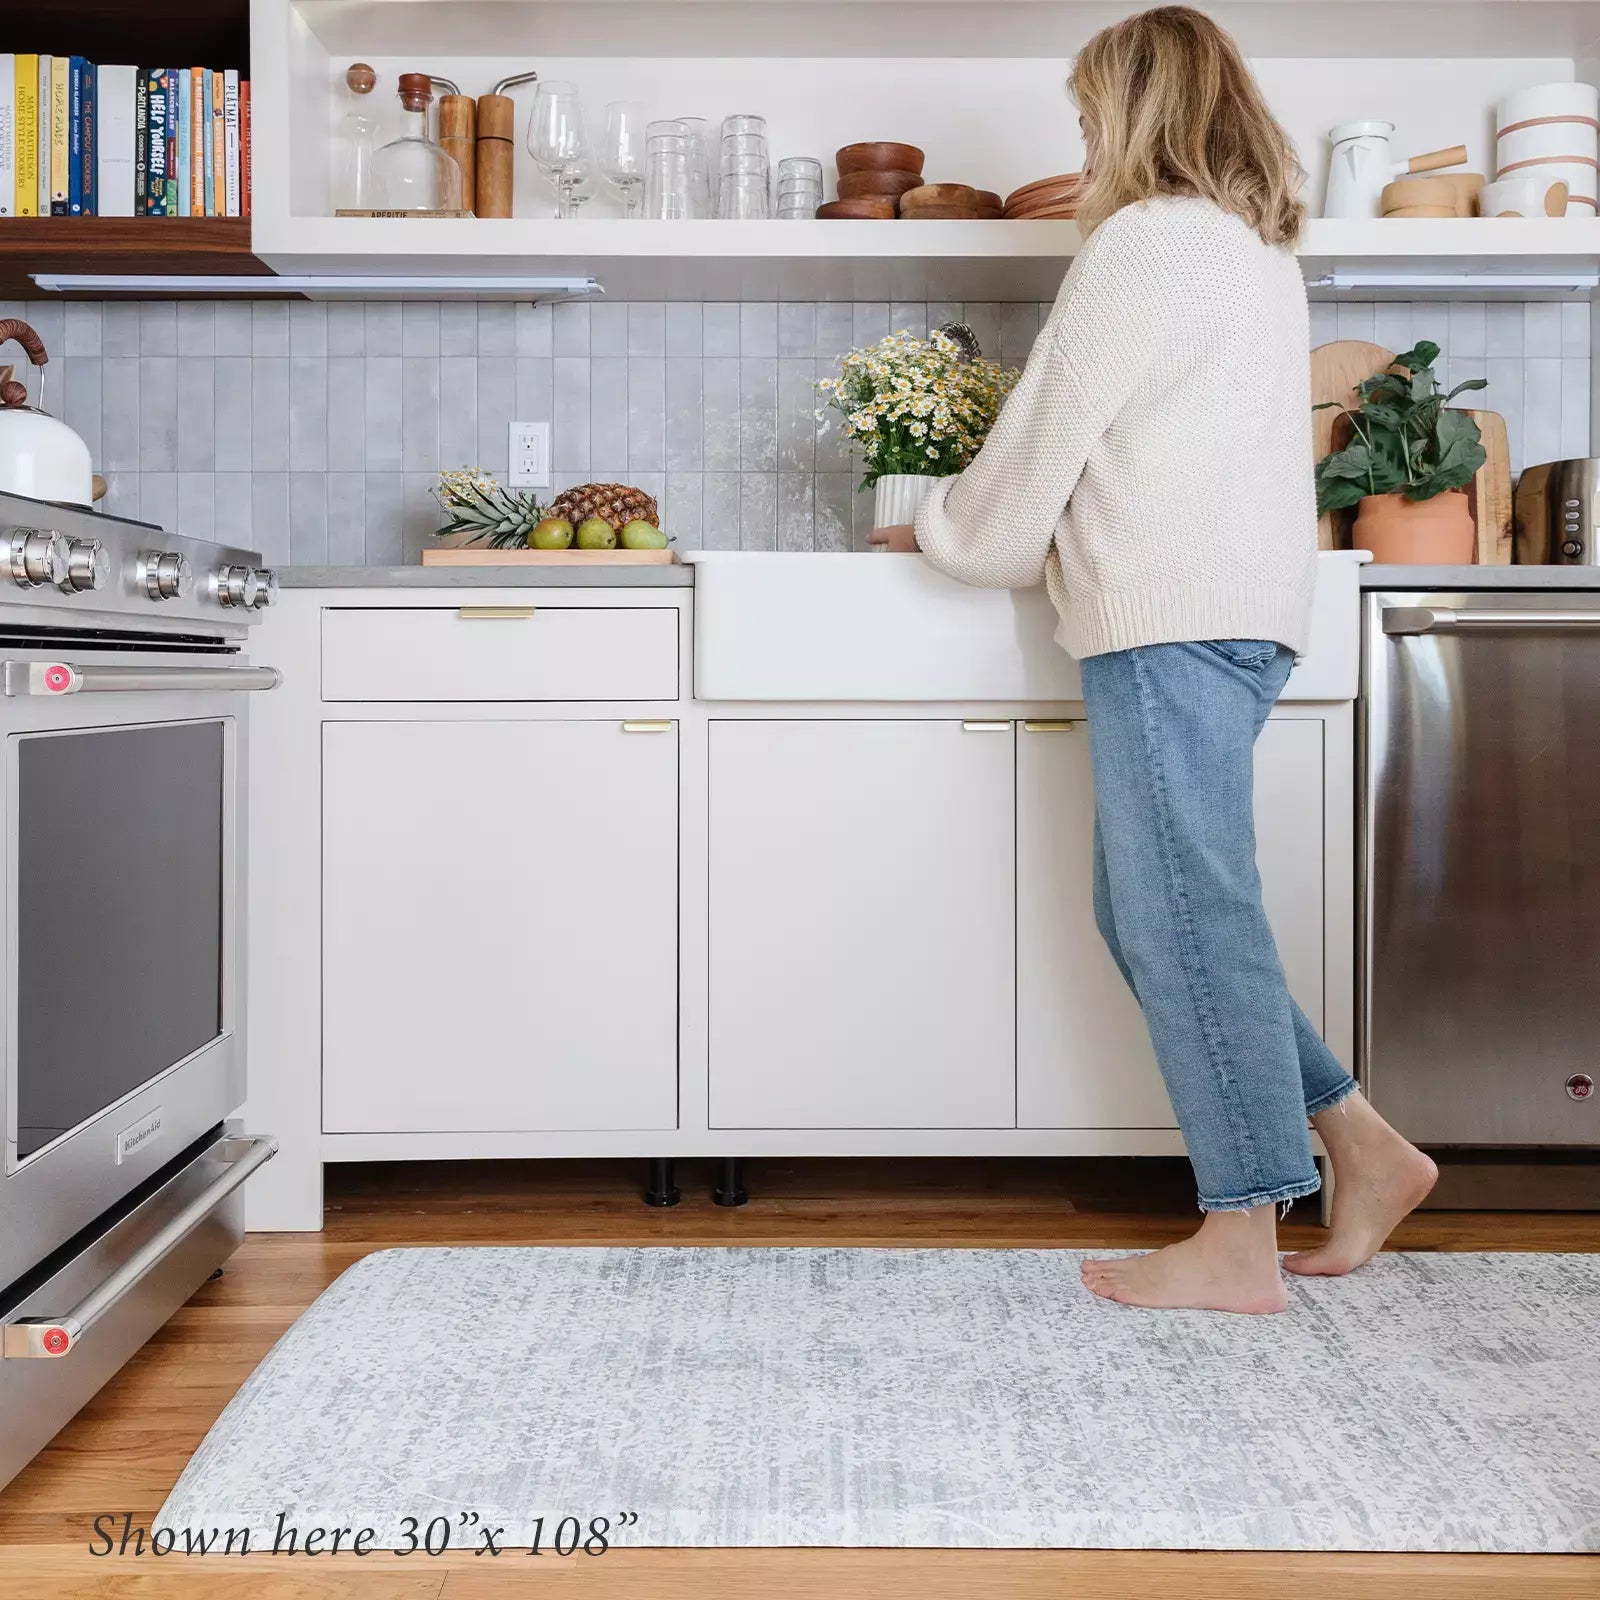 Gray neutral boho print kitchen mat with woman in kitchen shown in size 30x108